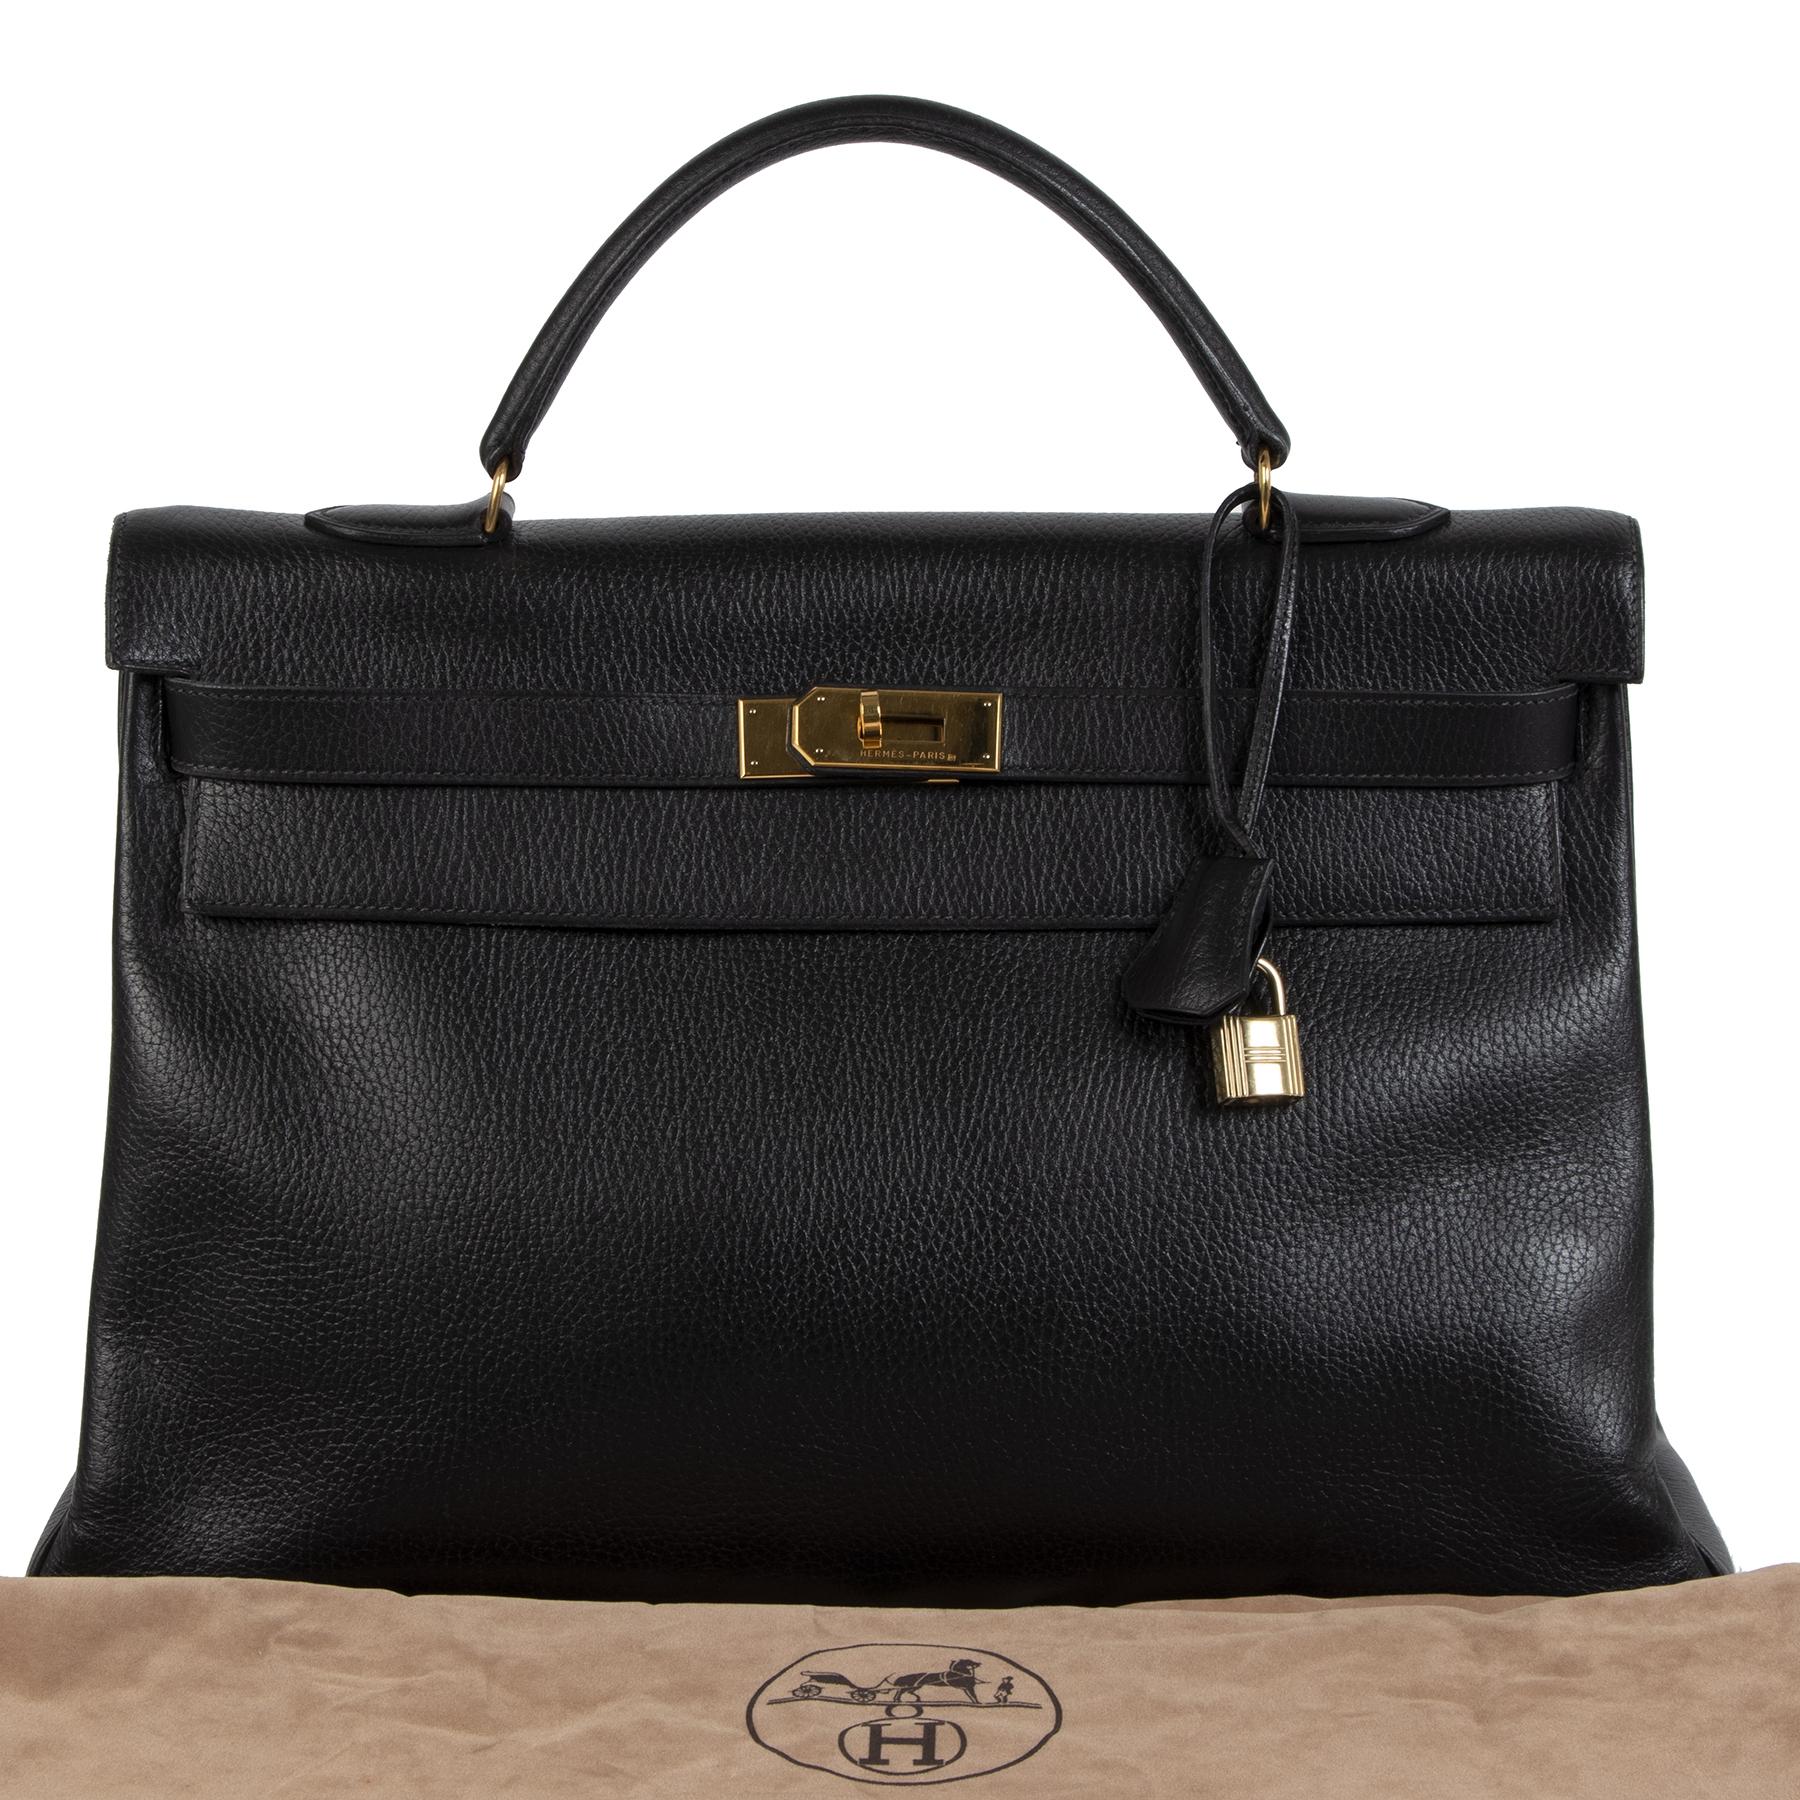 This spacious Hermès Kelly bag is crafted out of precious Vache Ardennes leather. The bag features gold toned hardware details. The interior compartment will fit your documents and daily essentials perfectly.